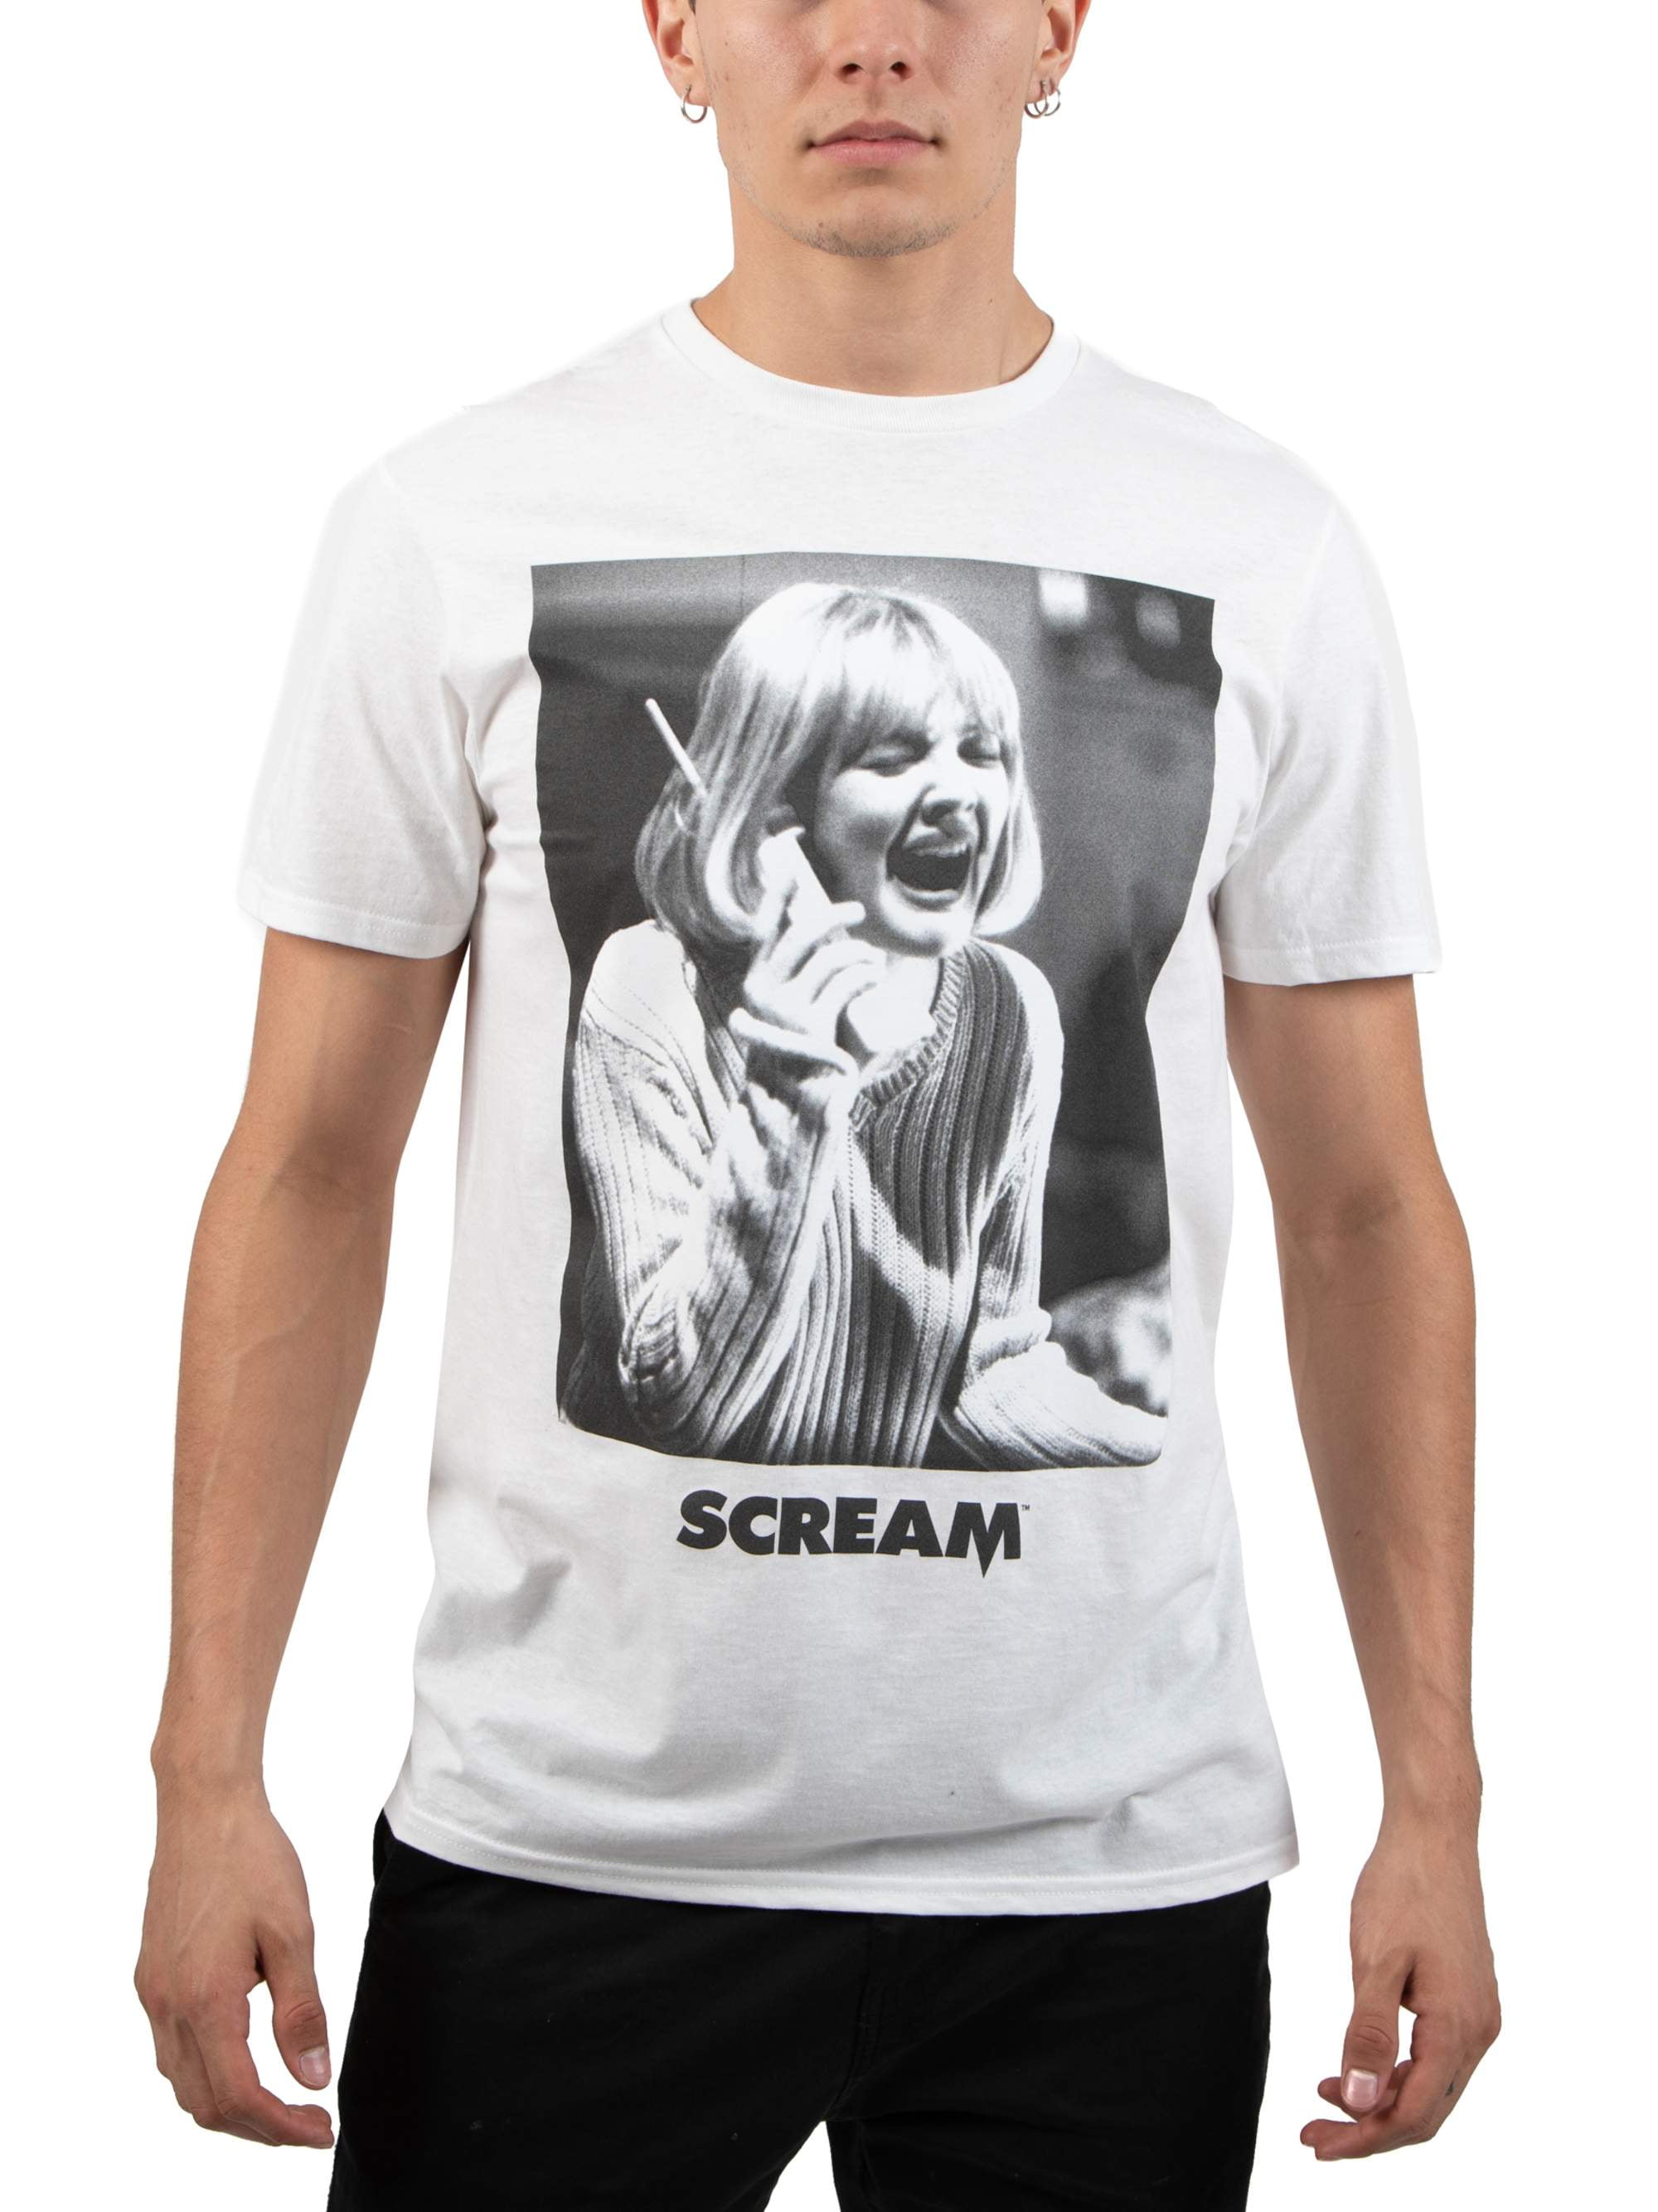 Drew Barrymore SCREAM TShirt, Let's Watch Scary Movie T-Shirt Size  S-5XL